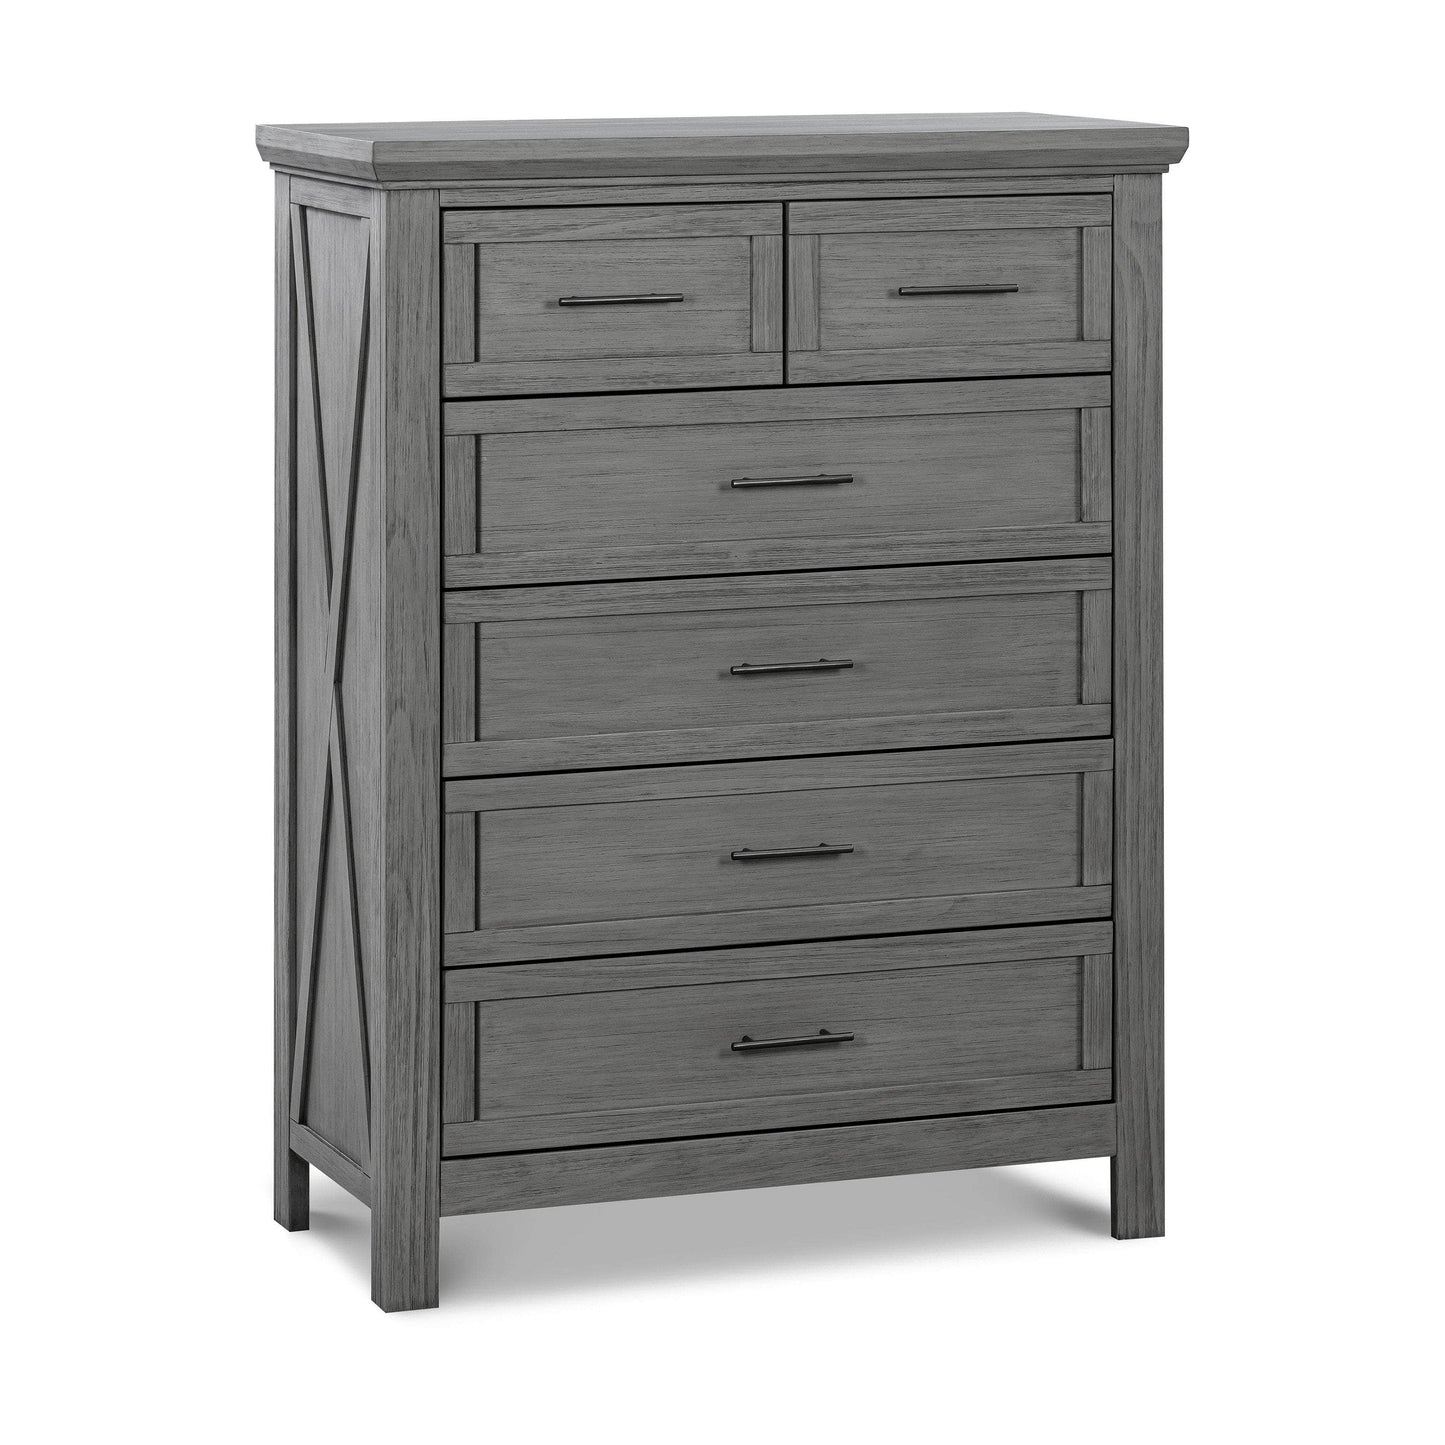 B14525WC,Emory Farmhouse 6-Drawer Chest in Weathered Charcoal